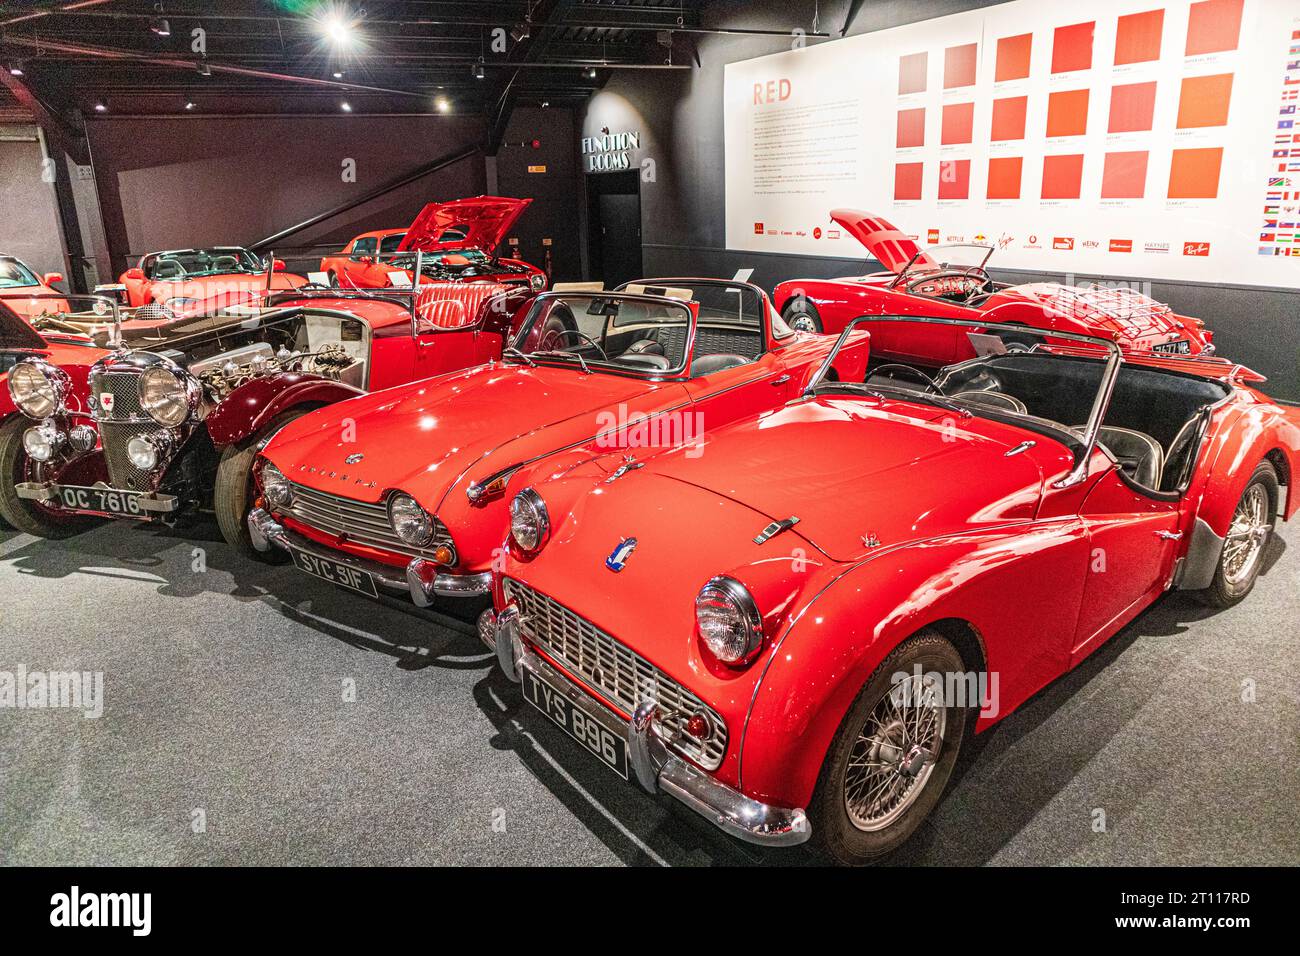 A signal red Triumph TR3A in the Haynes Motor Museum, Sparkford, Yeovil, Somerset, England UK Stock Photo